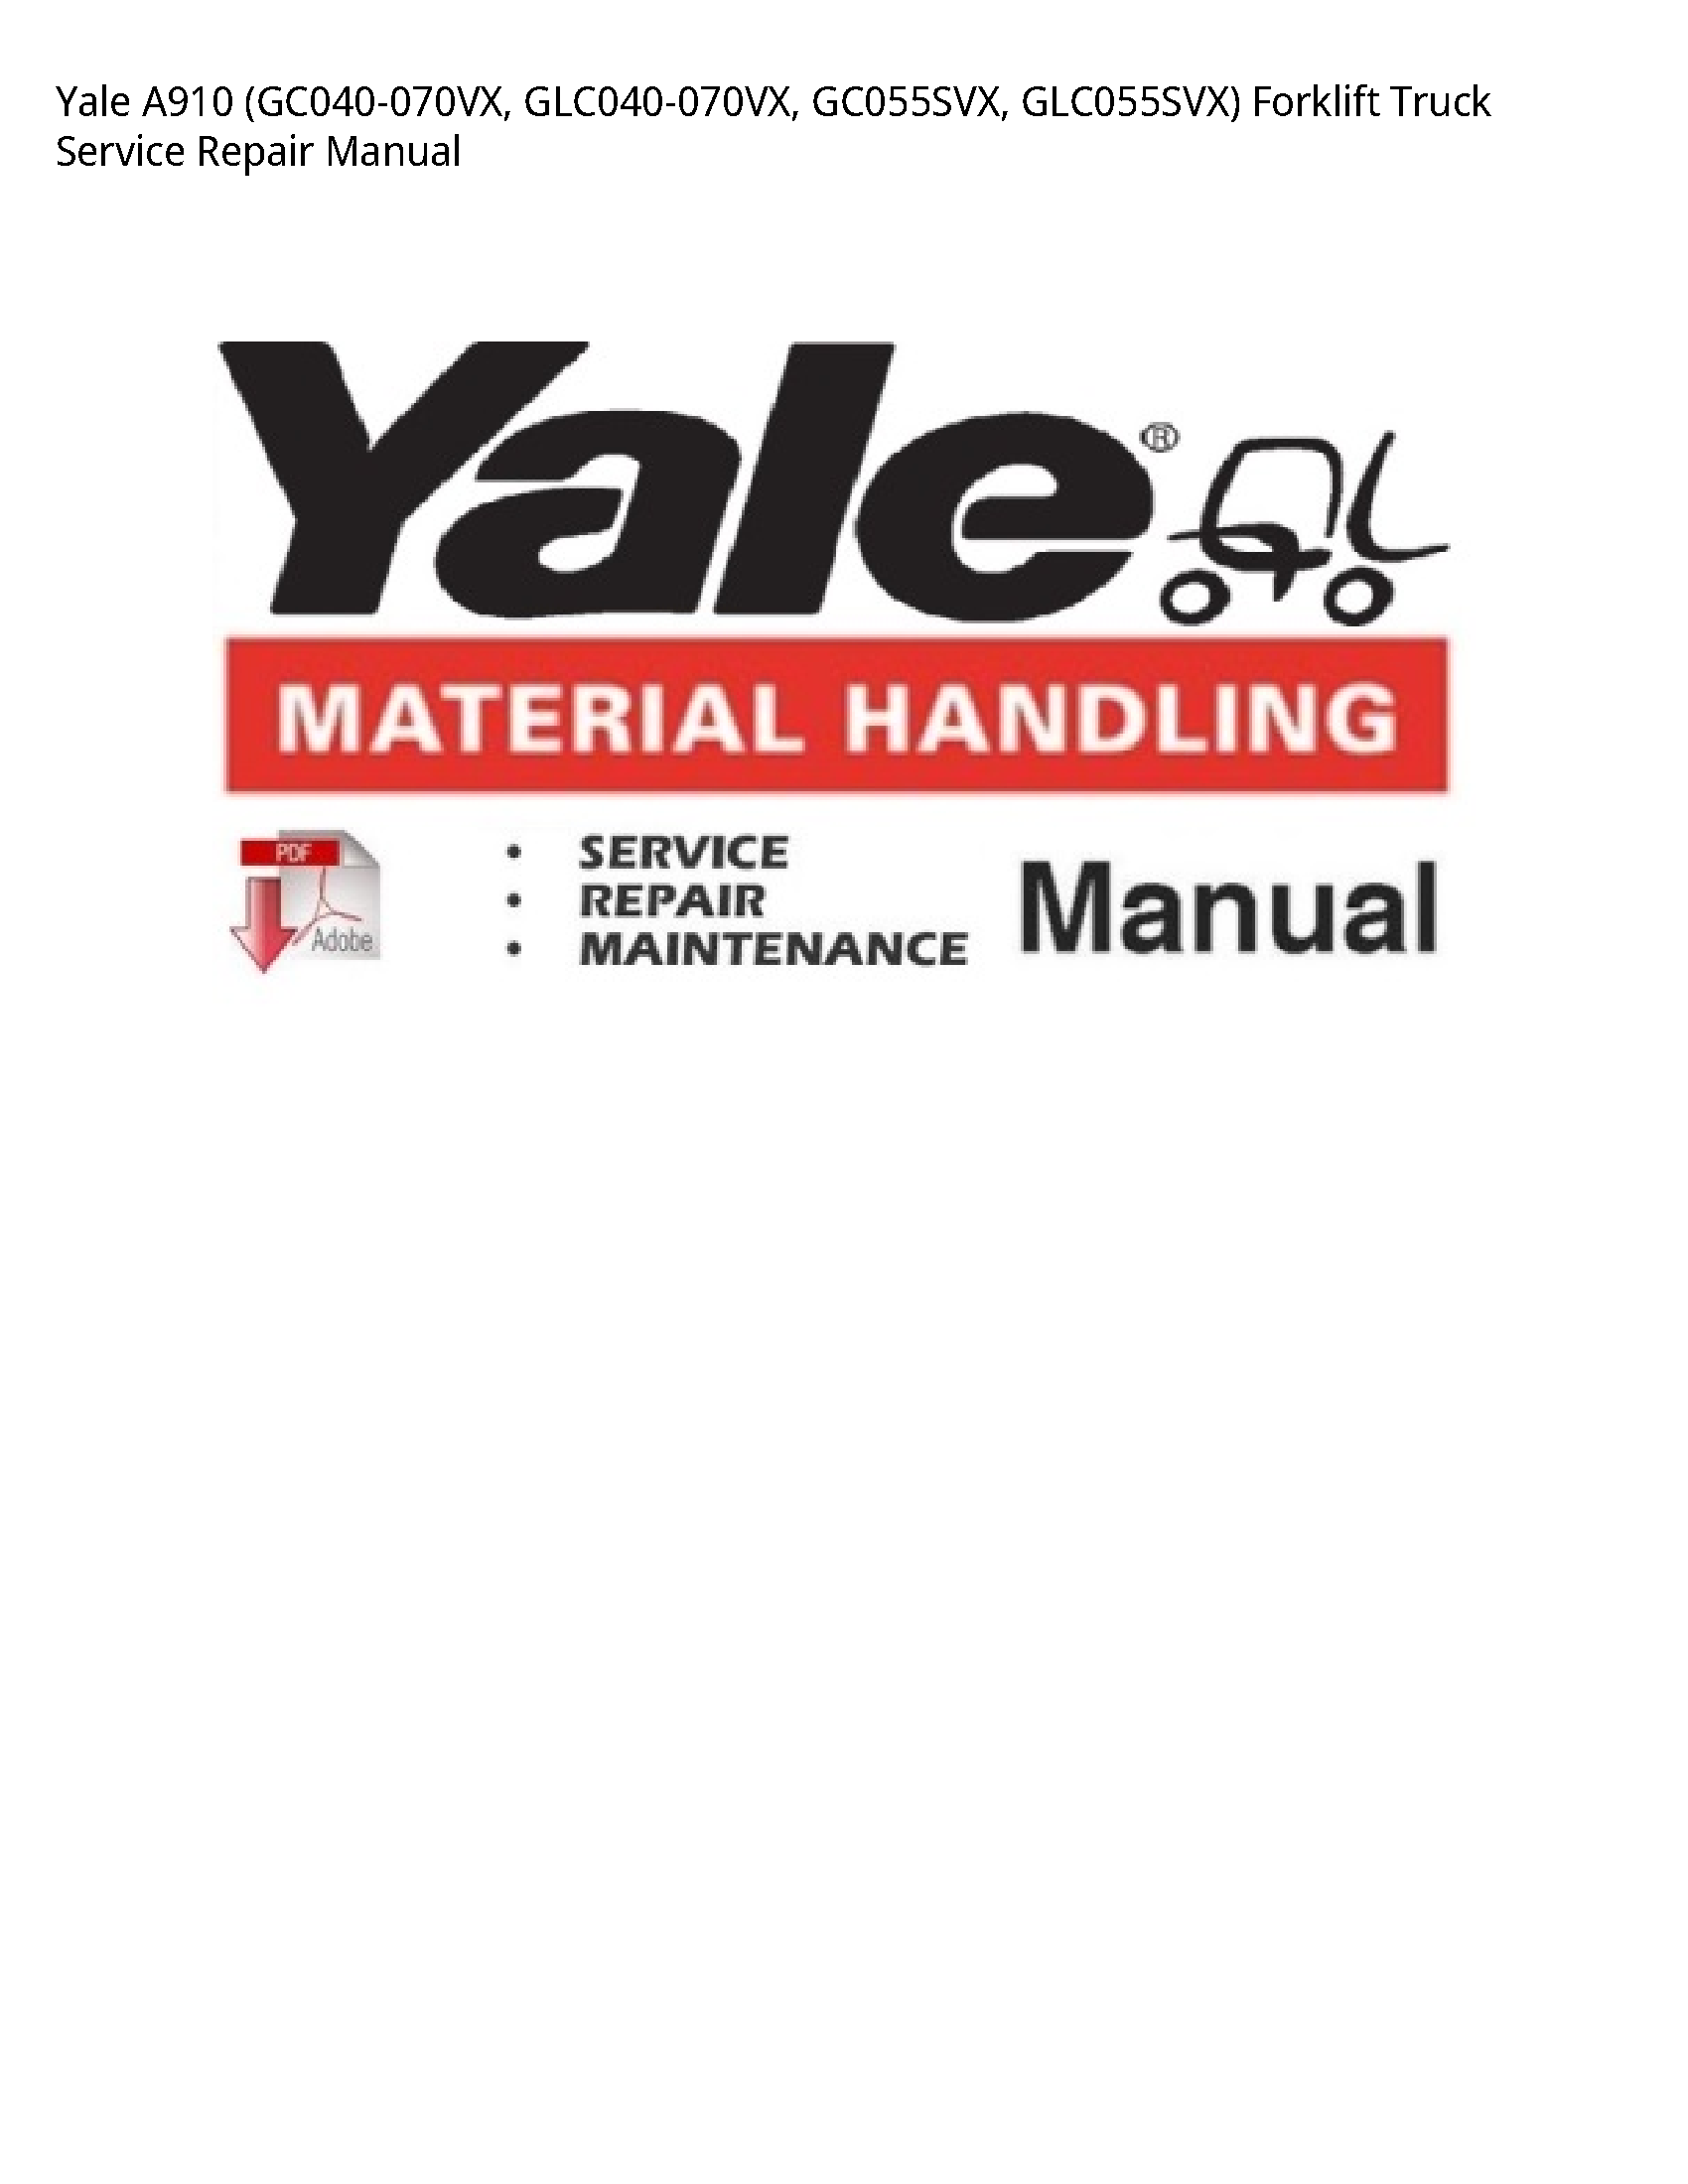 Yale A910 Forklift Truck manual